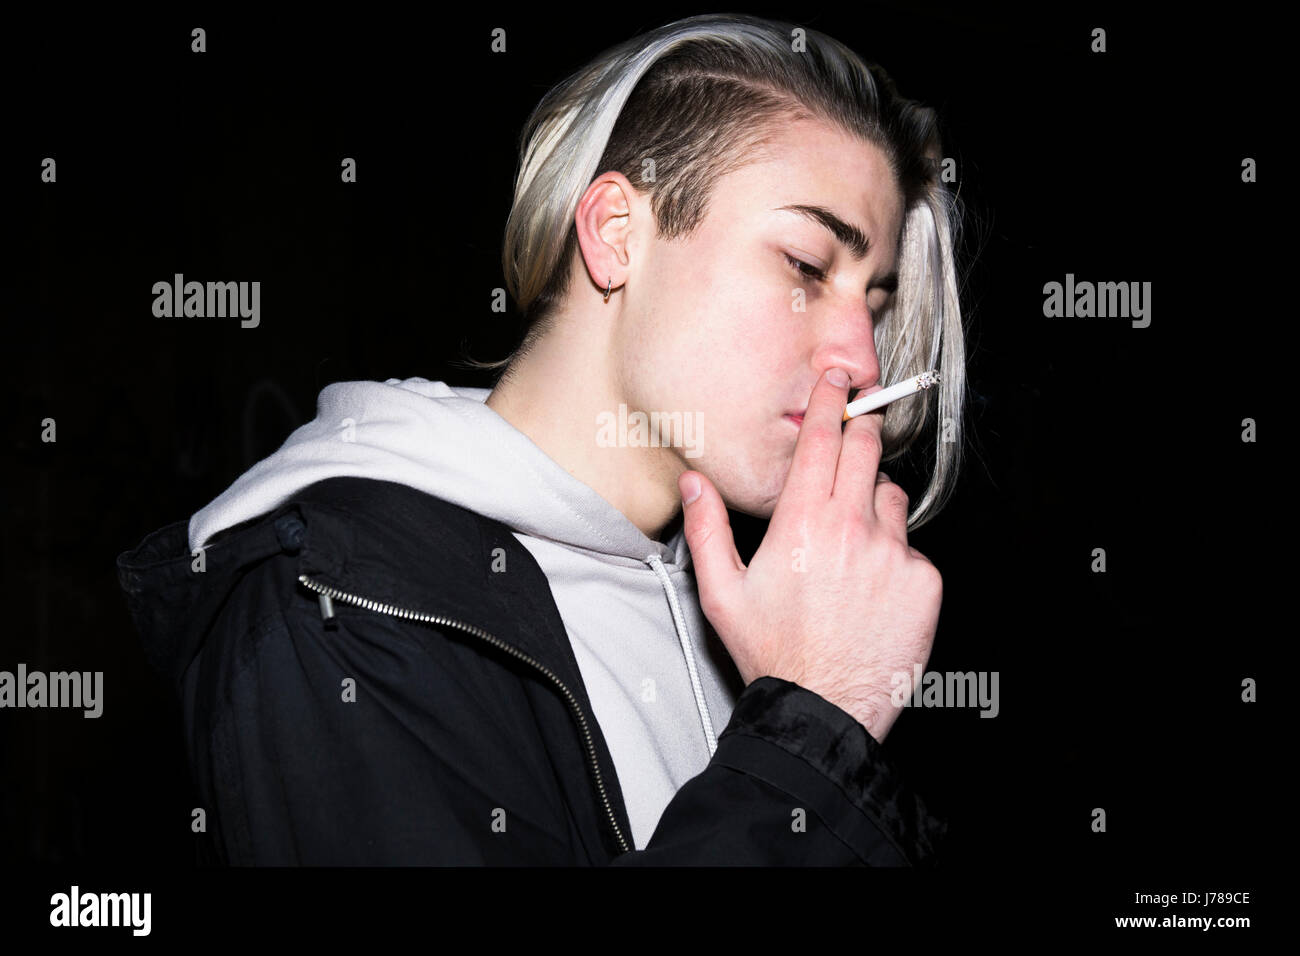 Young man smoking cigarette in front of black background Stock Photo